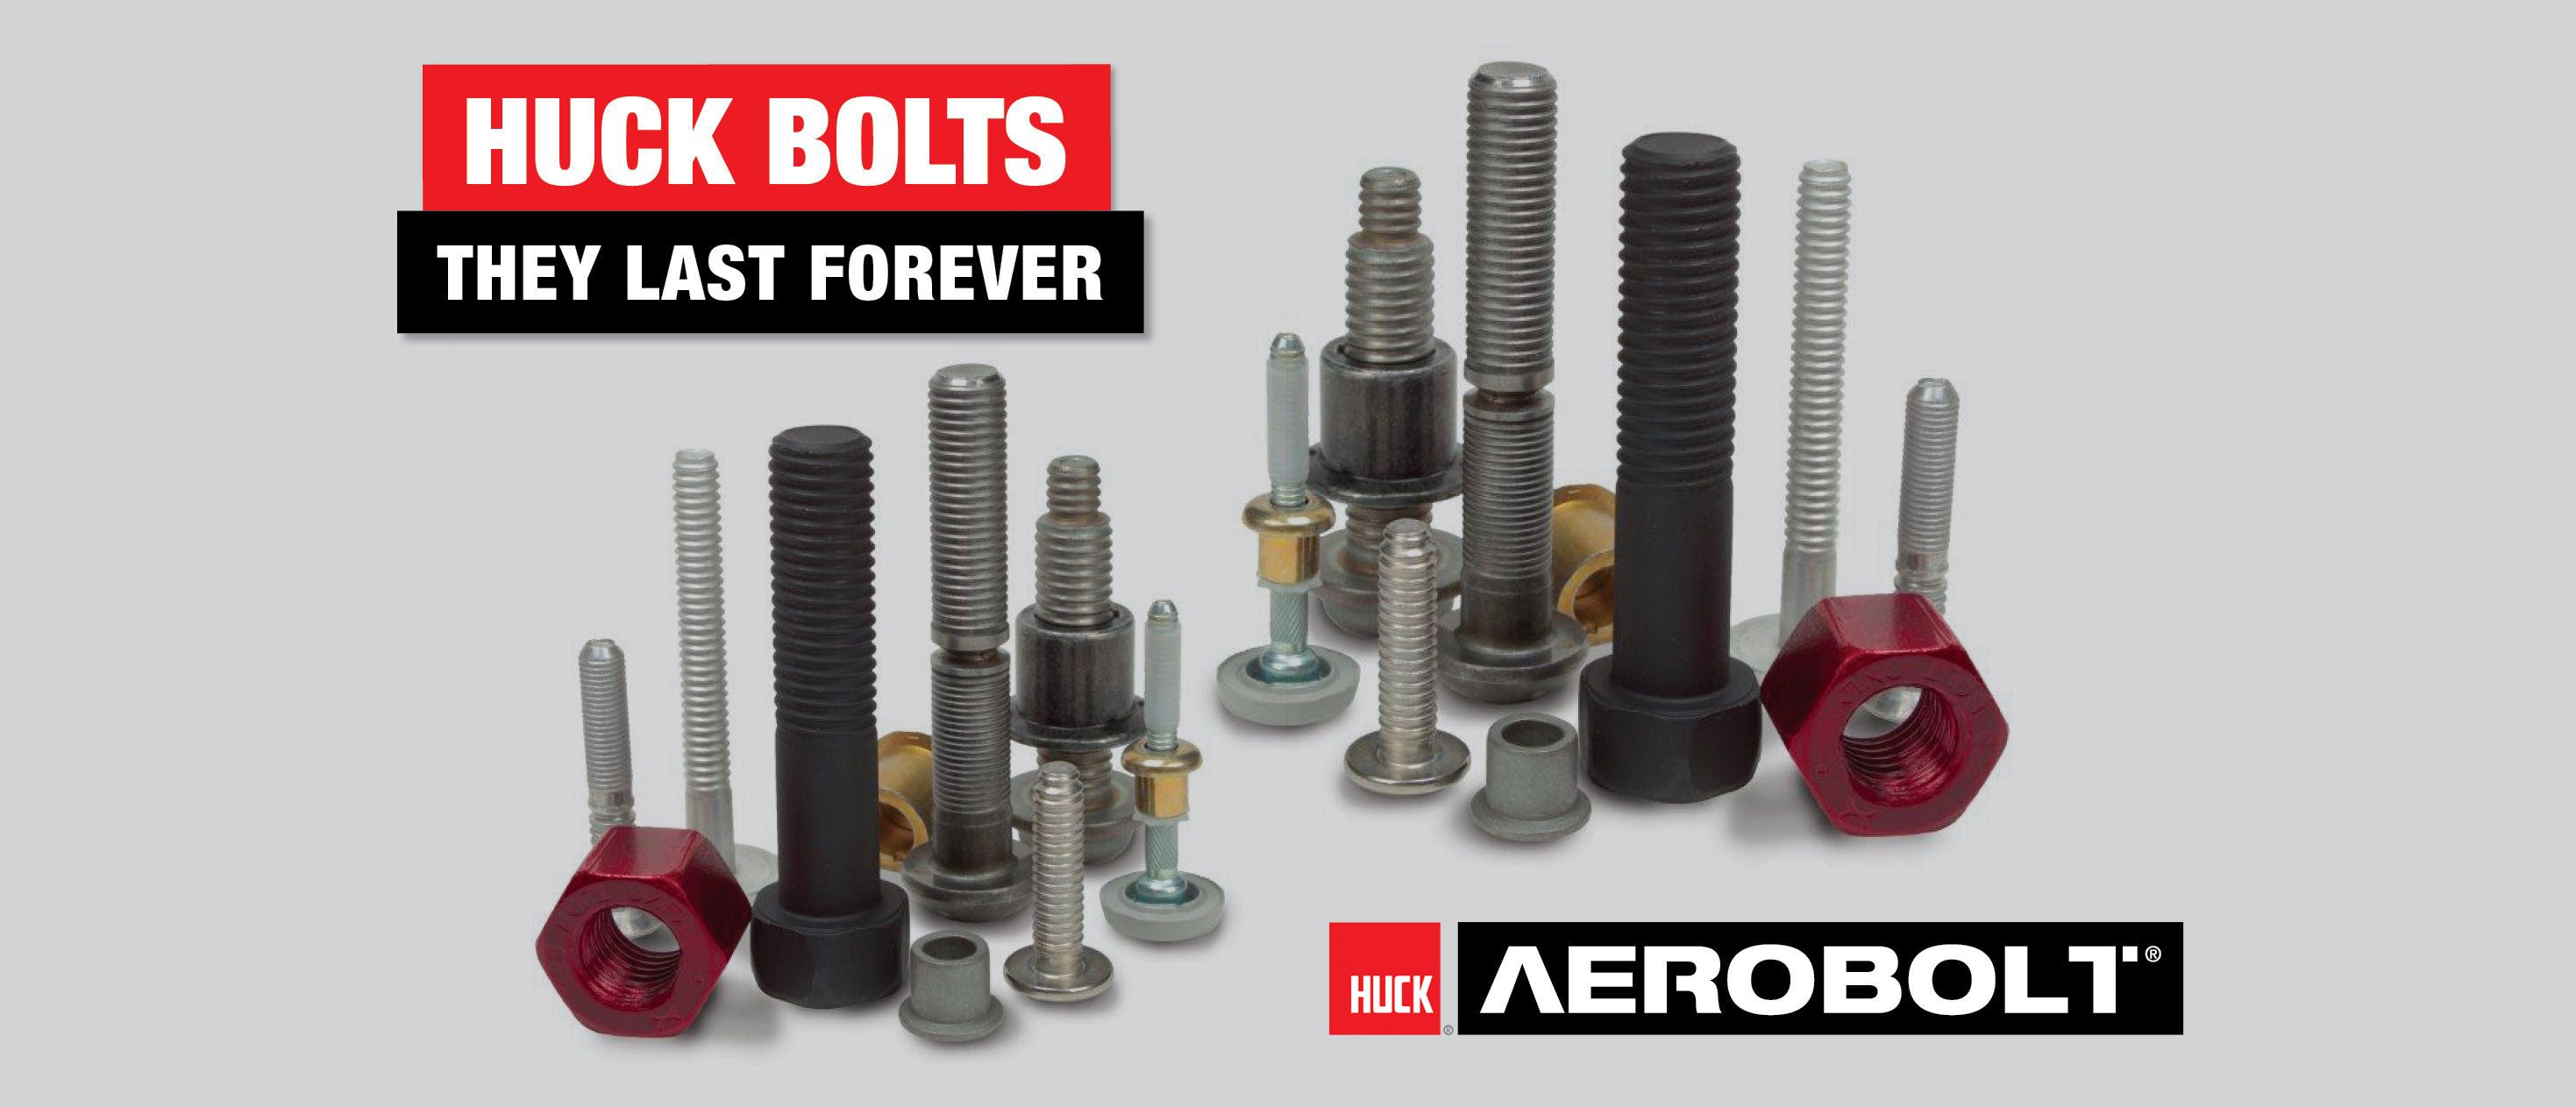 Non-Metallic Fasteners: Benefits & How to Use Them in Machine Design